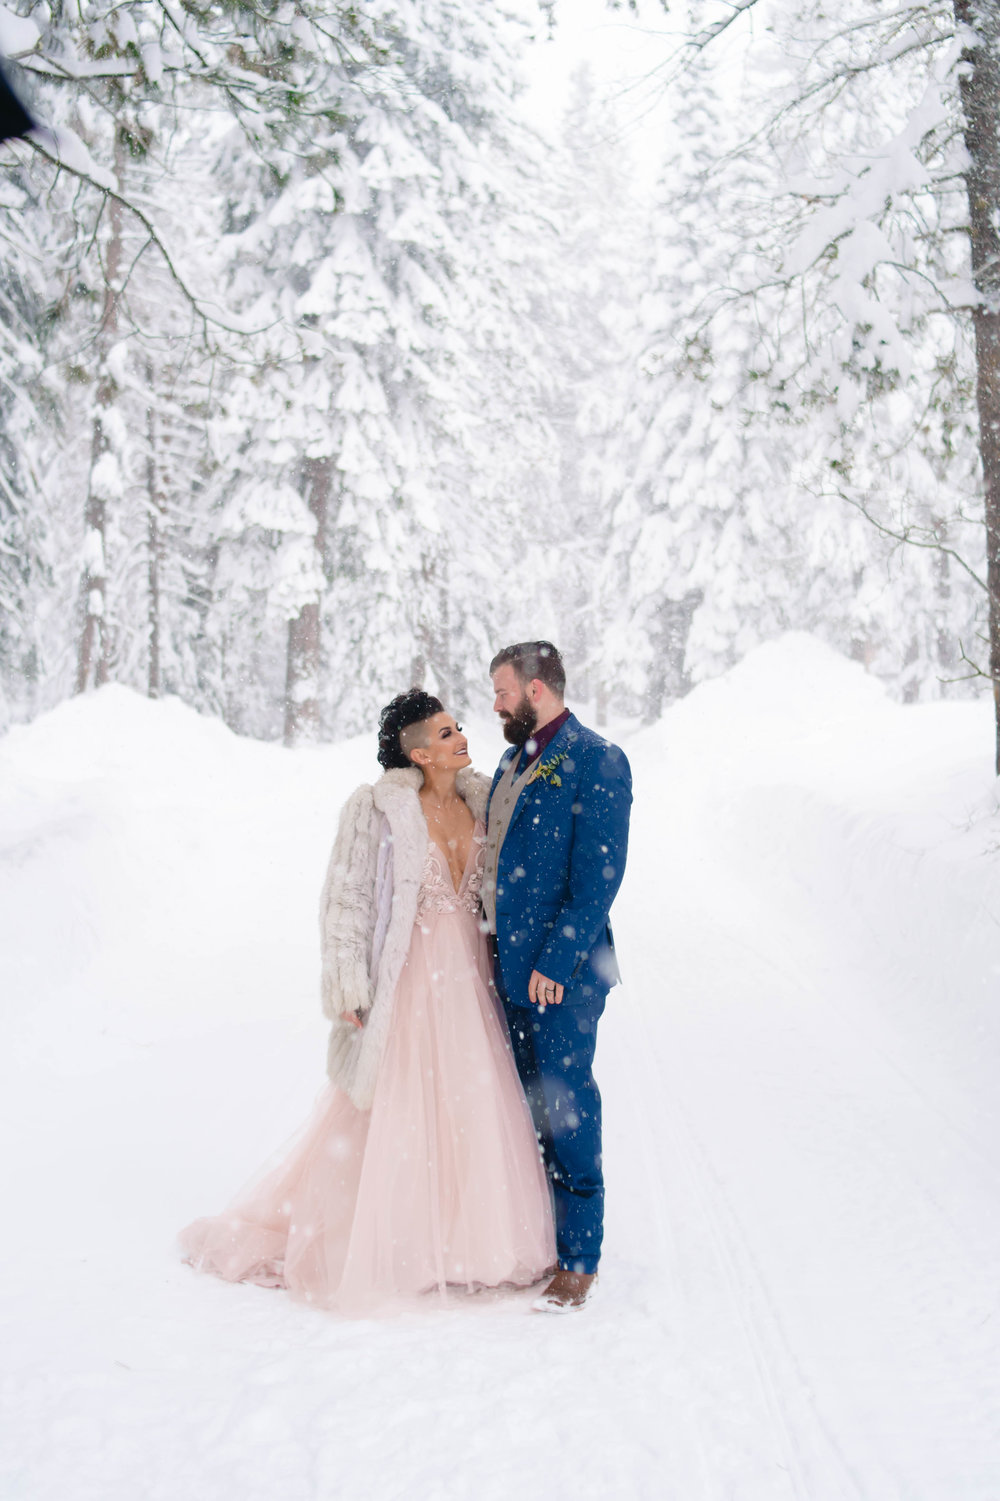 photo of a blush wedding gown and blue suit with the bride and groom during snowfall